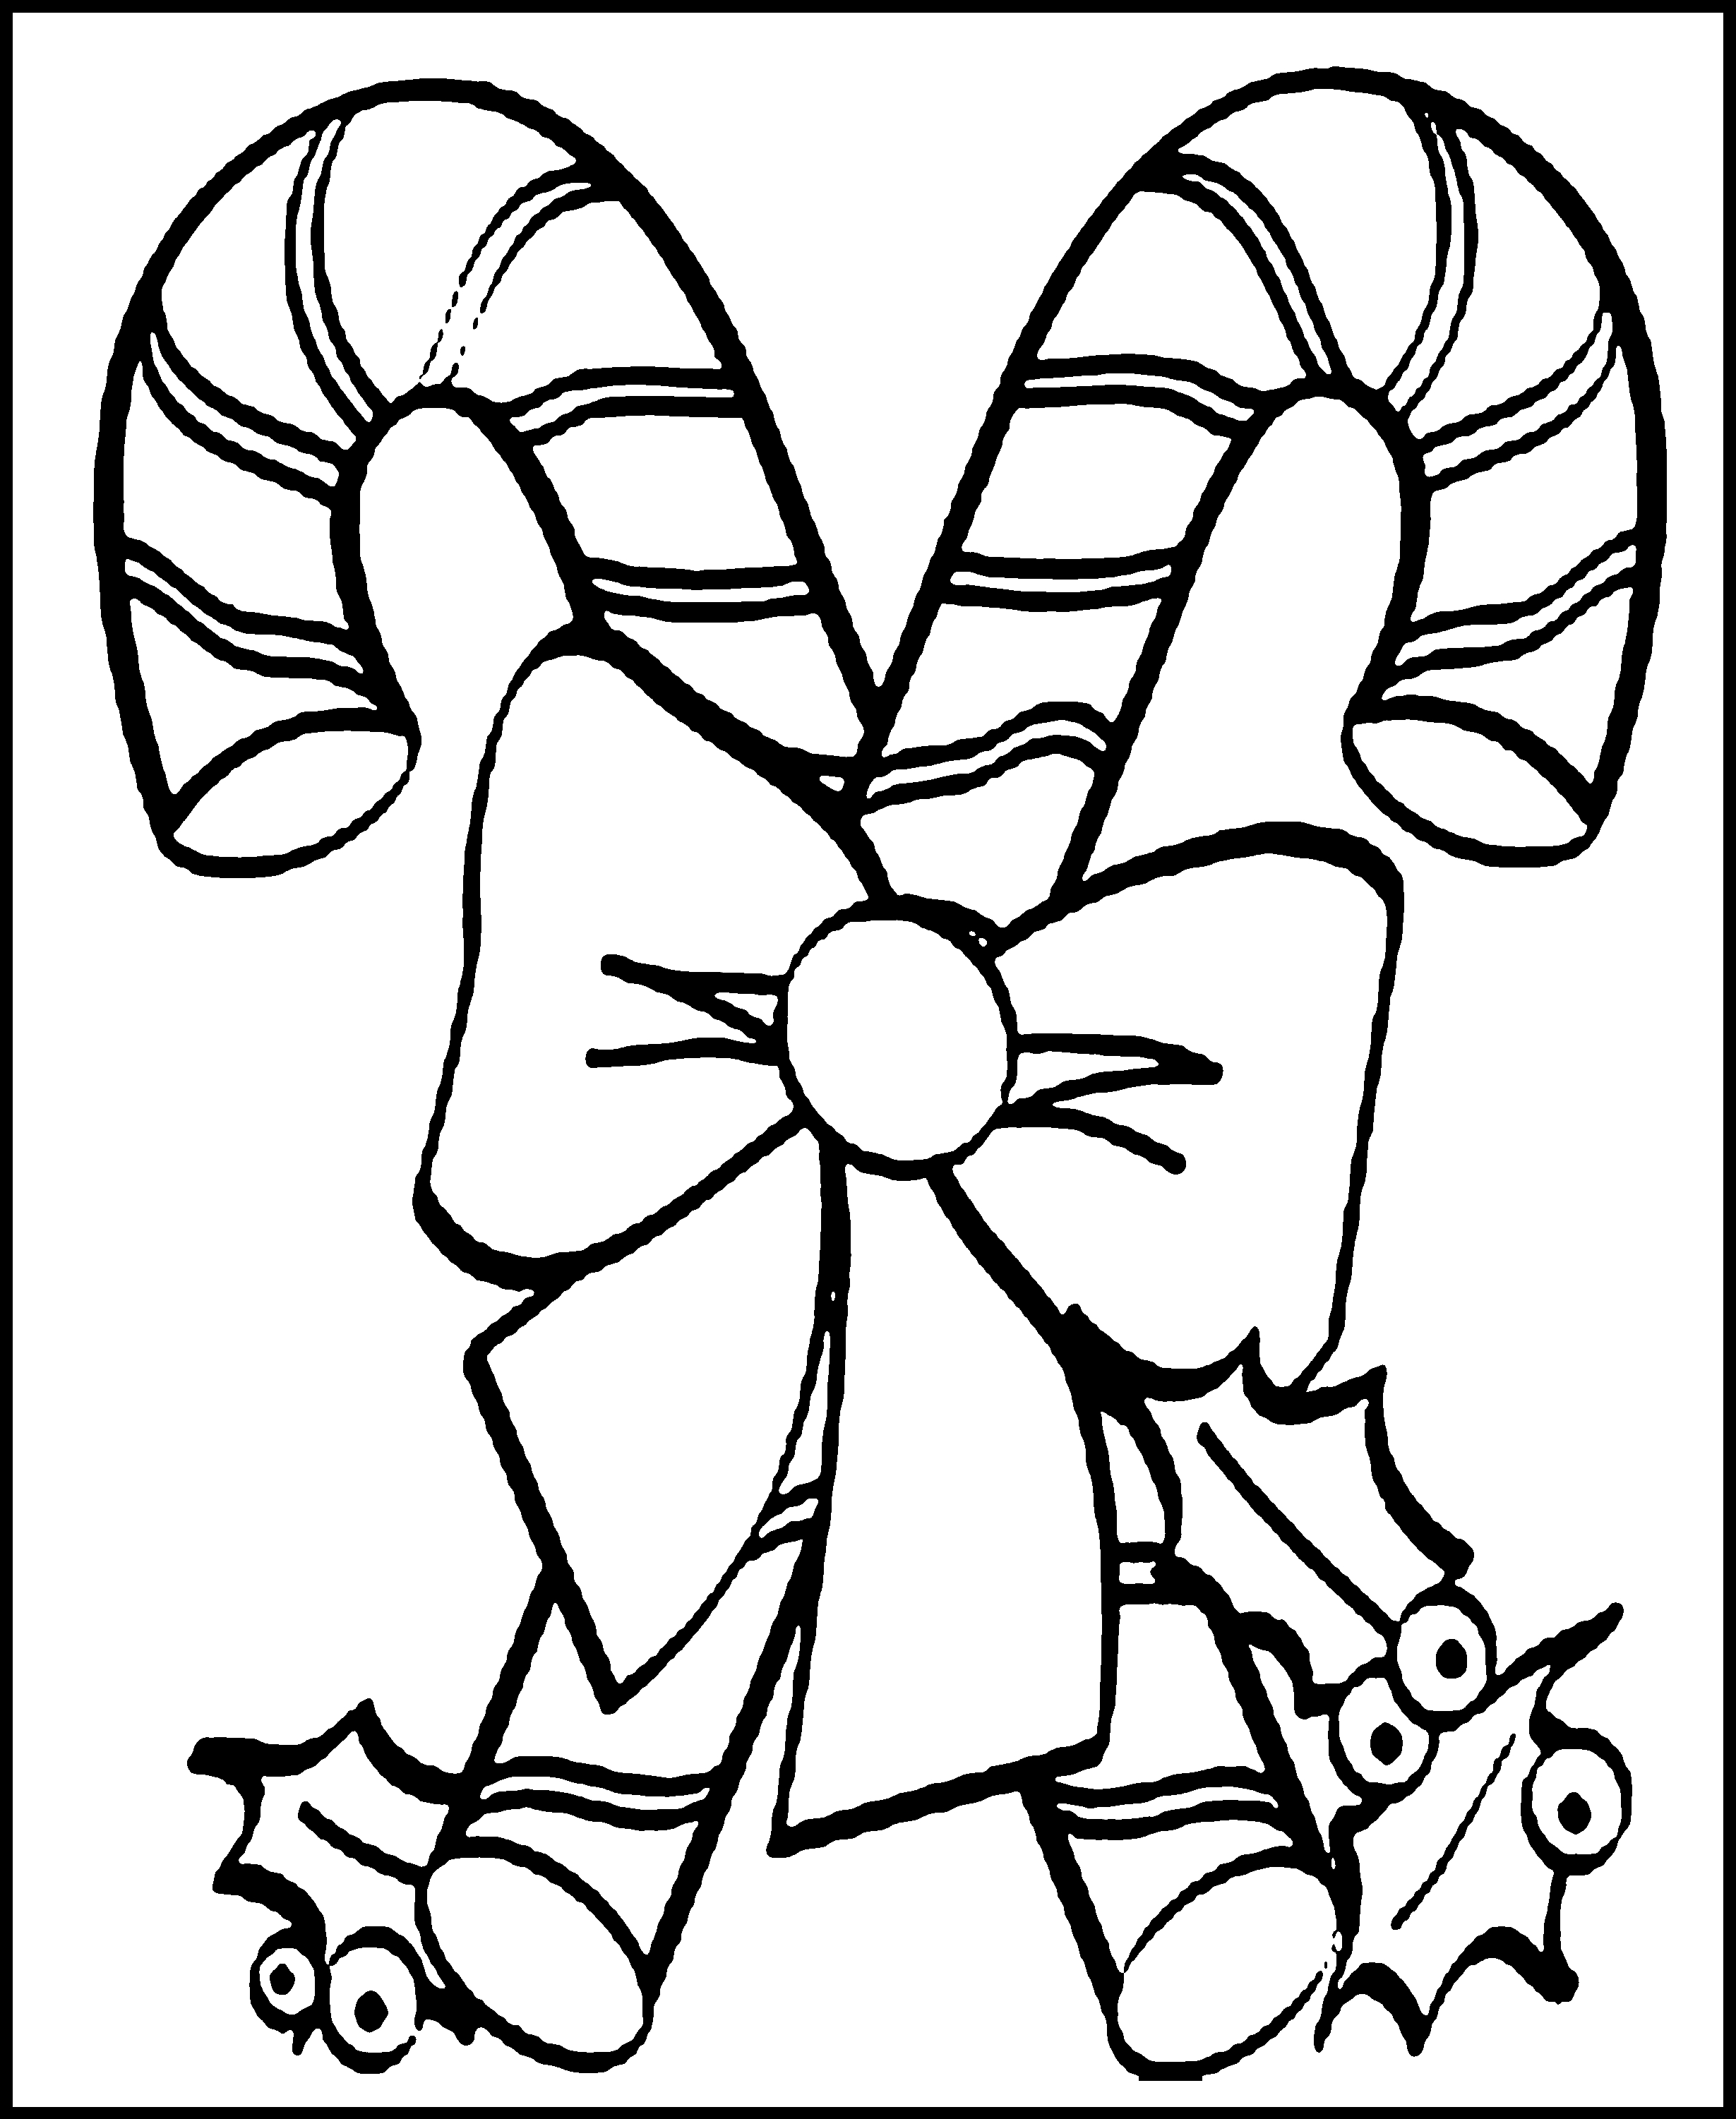 Christmas Coloring Pages at Free printable colorings